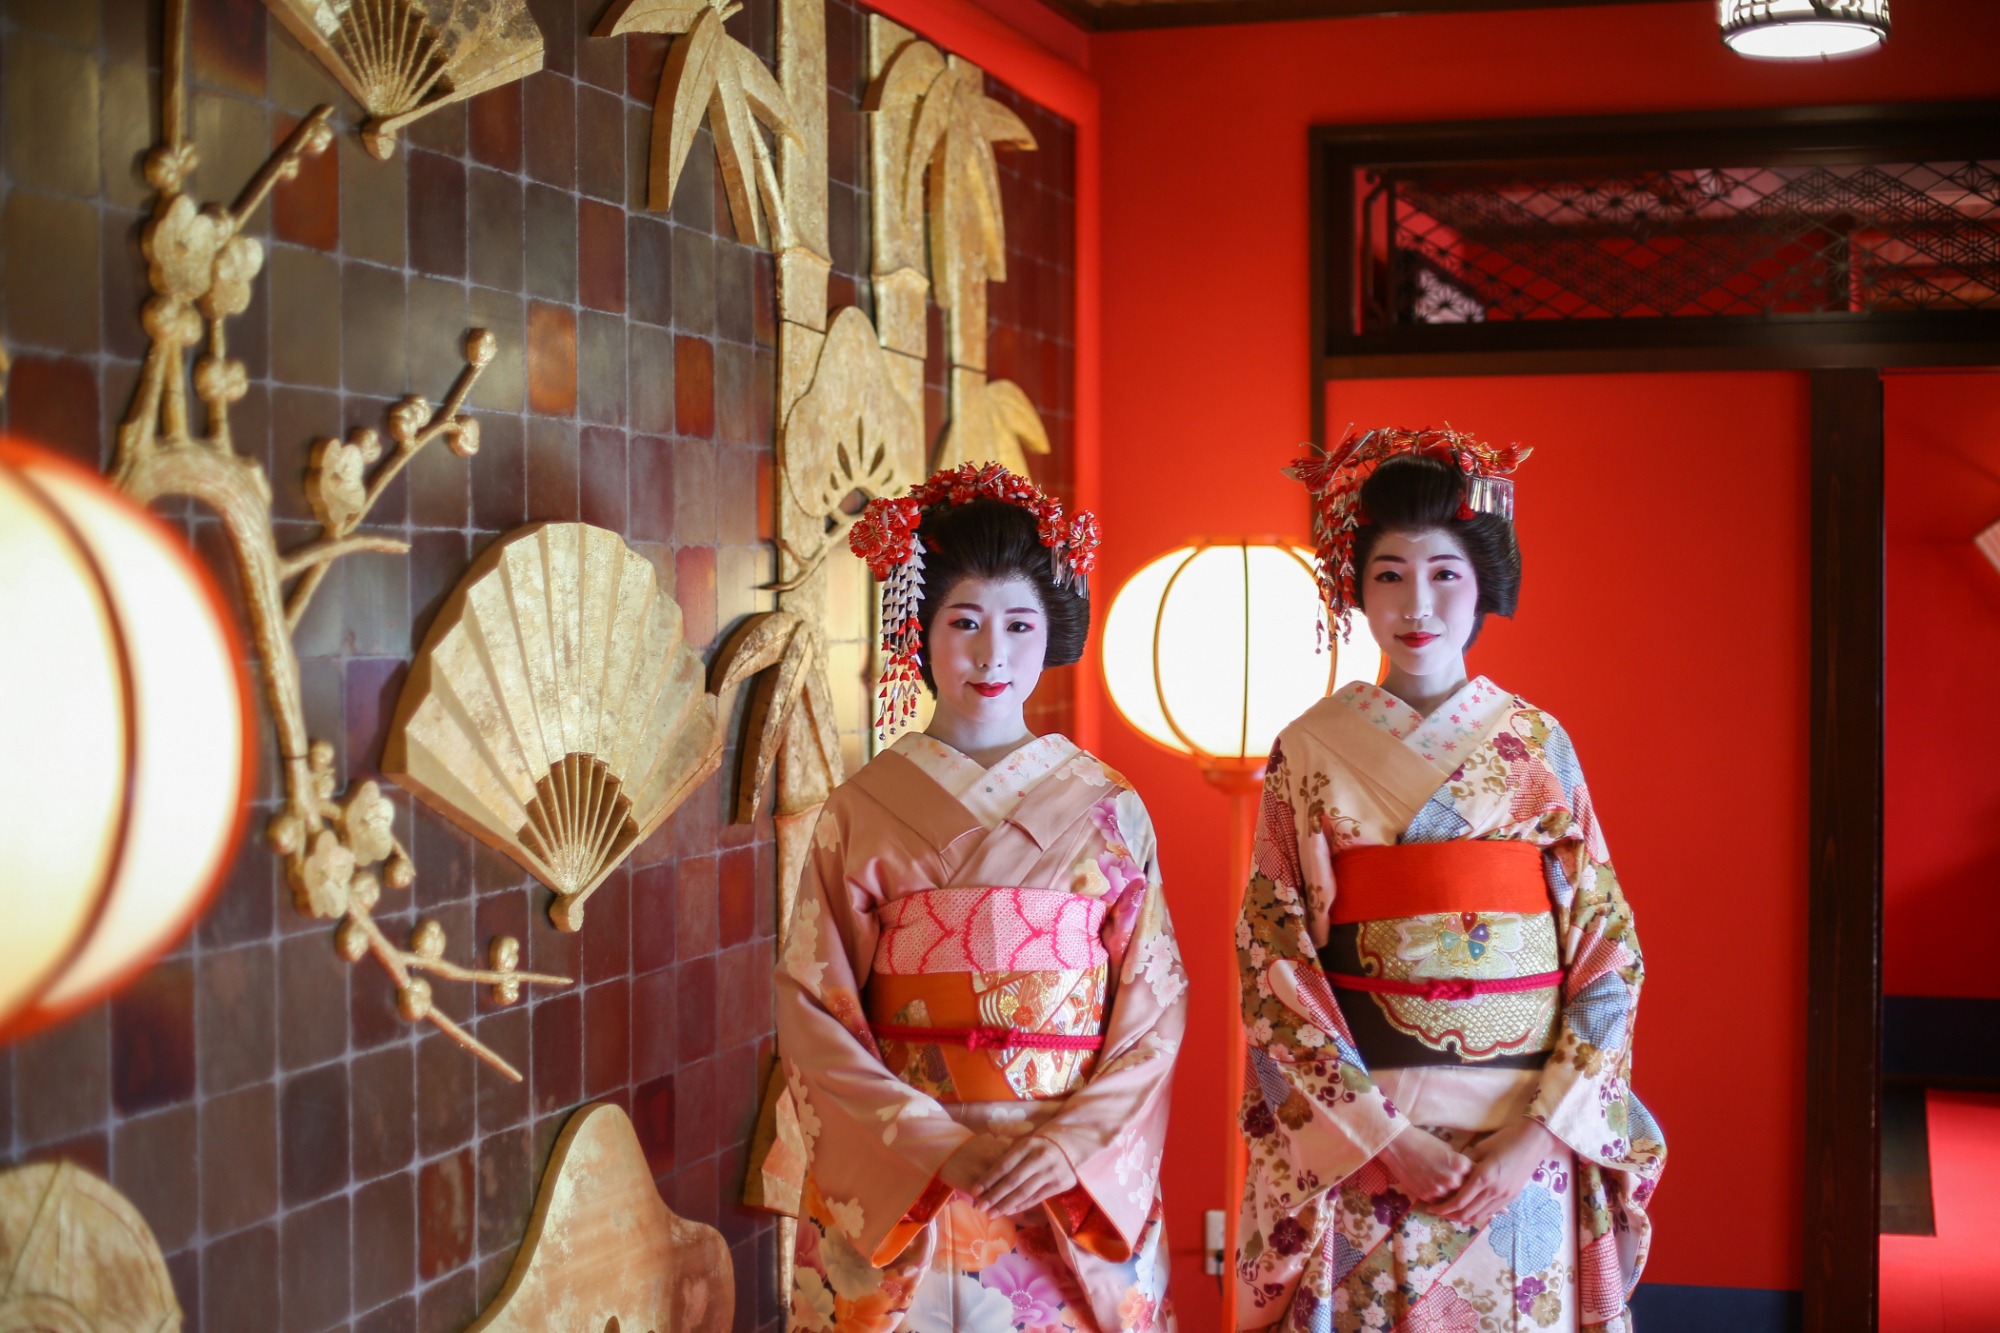 Find yourself intoxicated with the performance of a charming maiko